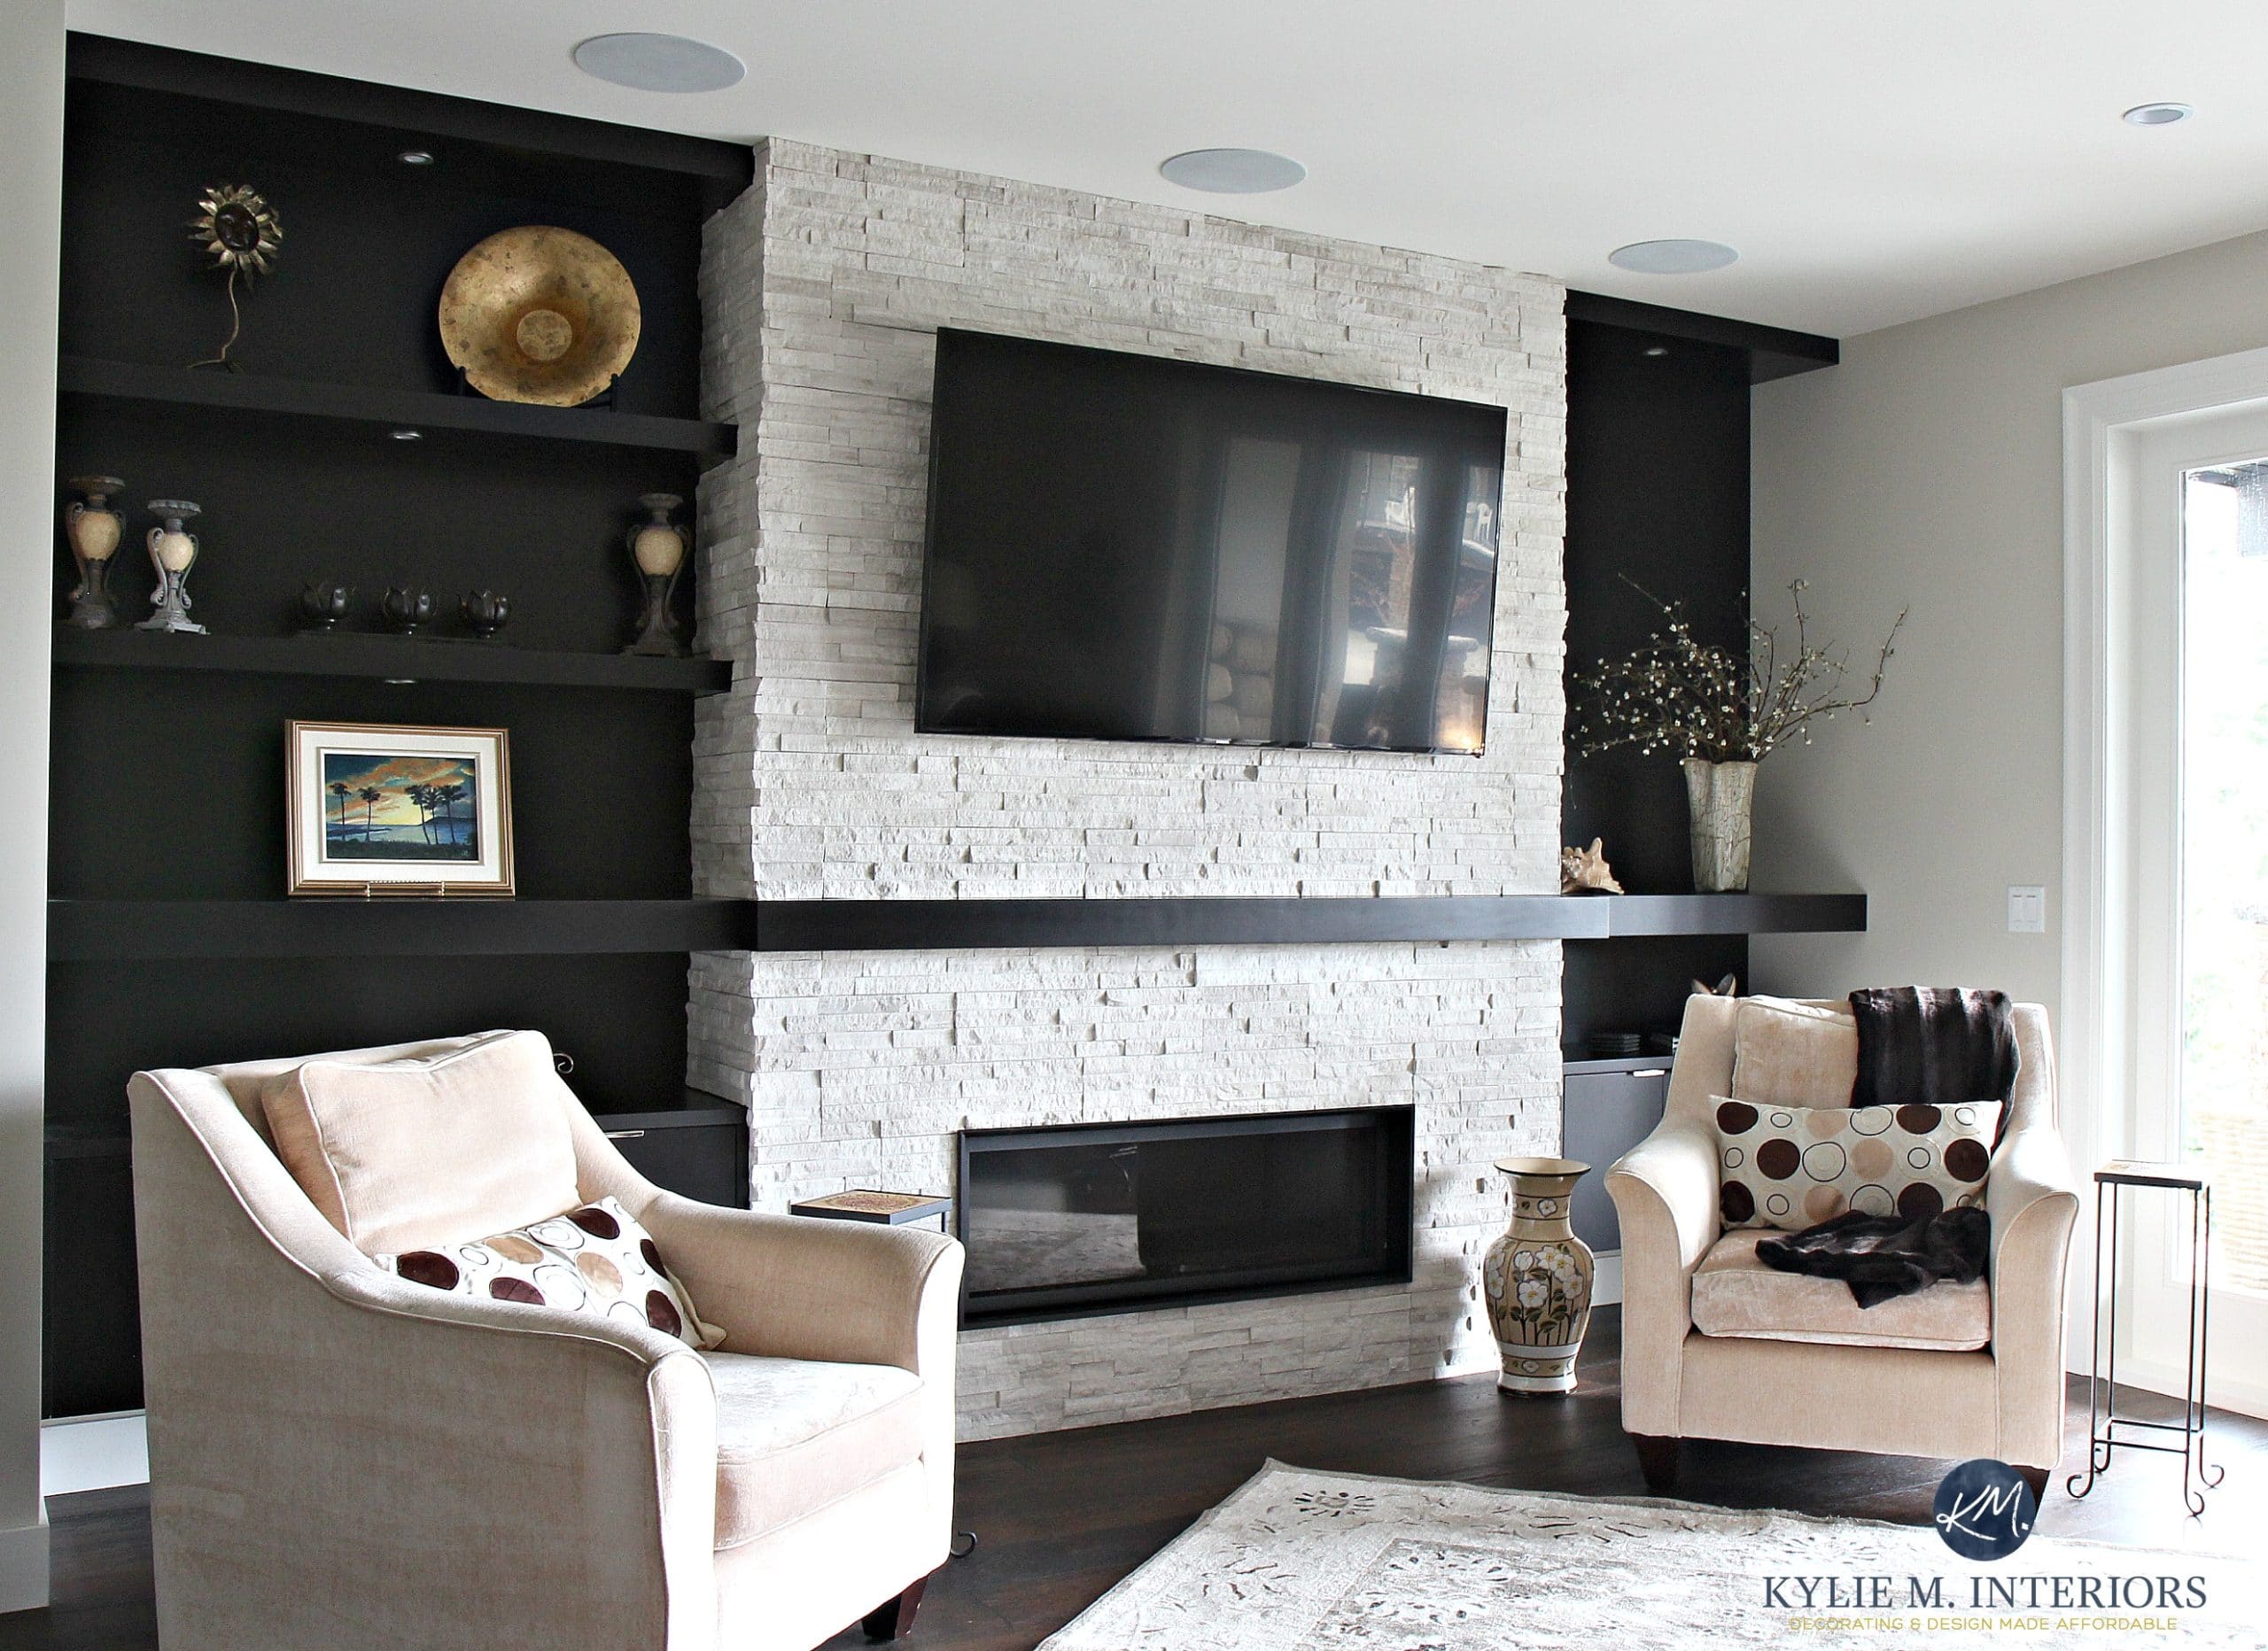 E-decor and Online Decorating Services. Beautiful ledgestone, travertine fireplace with Tv above, dark wood mantel and built-in bookshelves wtih 2 cream accent chairs. Kylie M Interiors